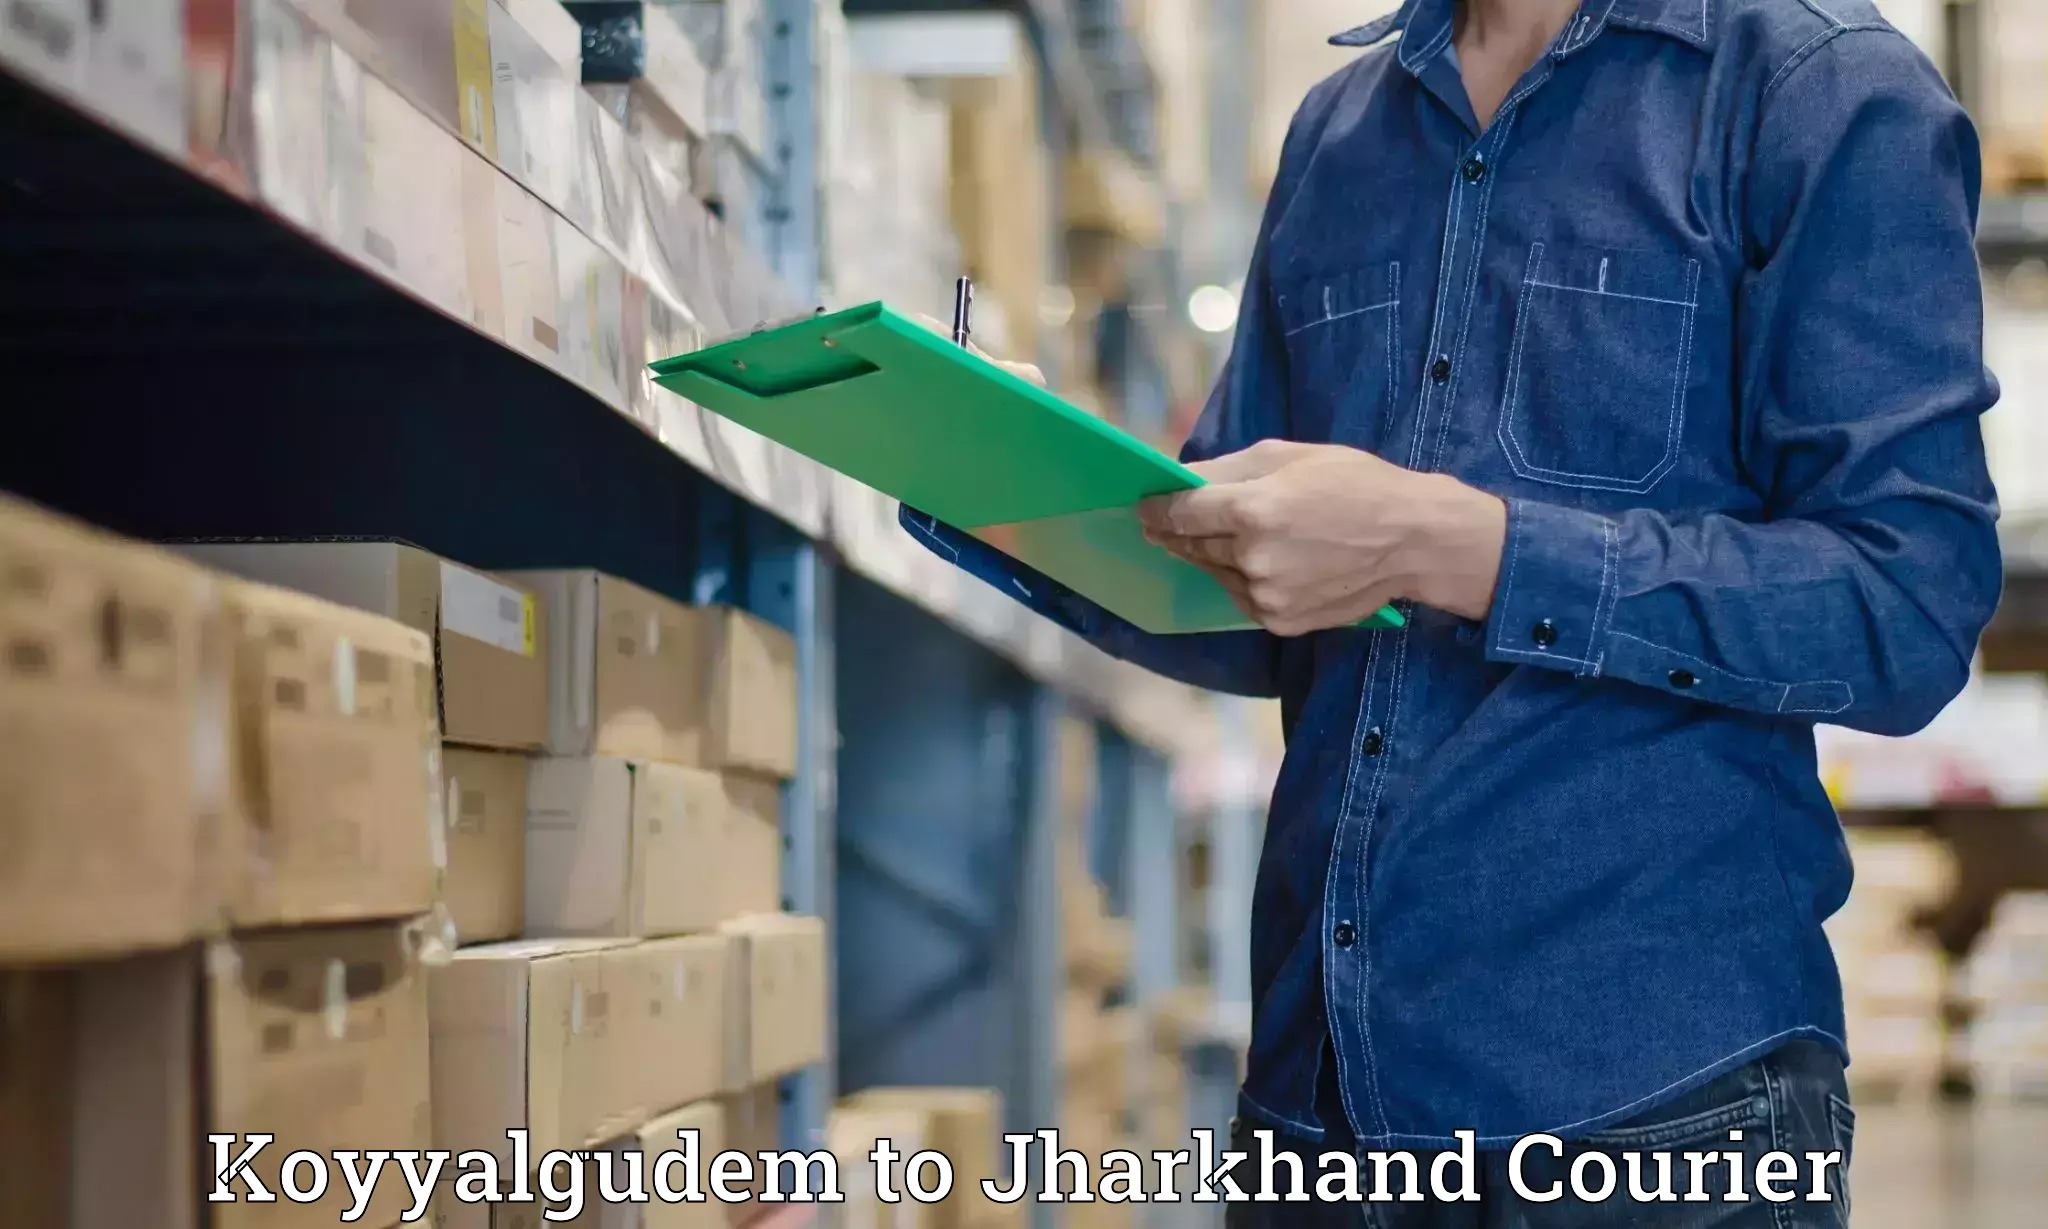 State-of-the-art courier technology Koyyalgudem to Topchanchi